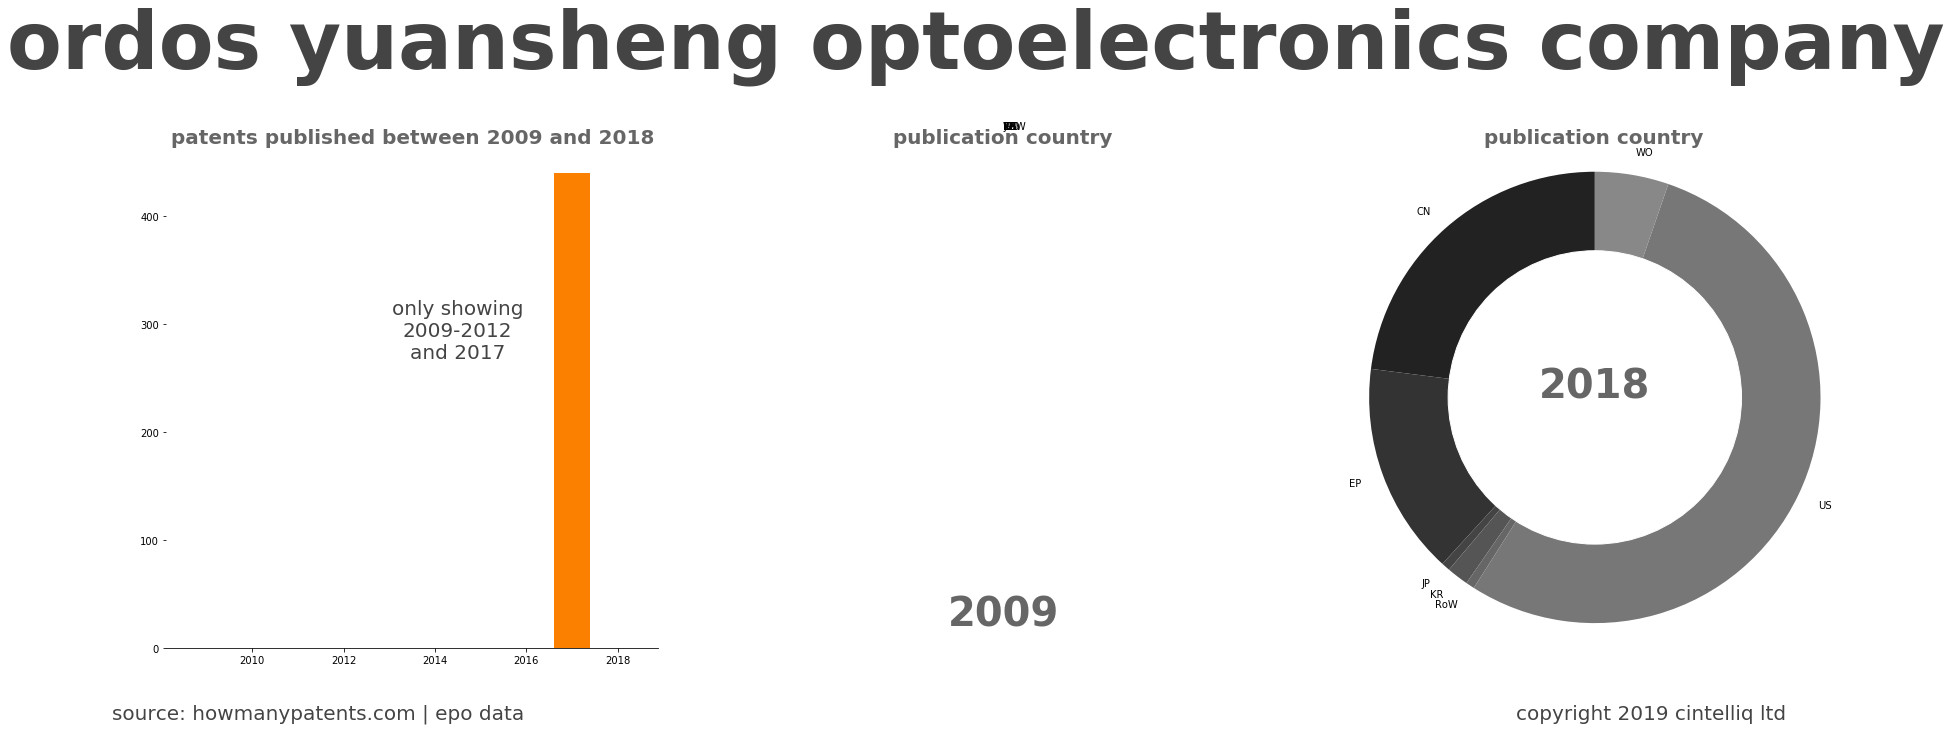 summary of patents for Ordos Yuansheng Optoelectronics Company